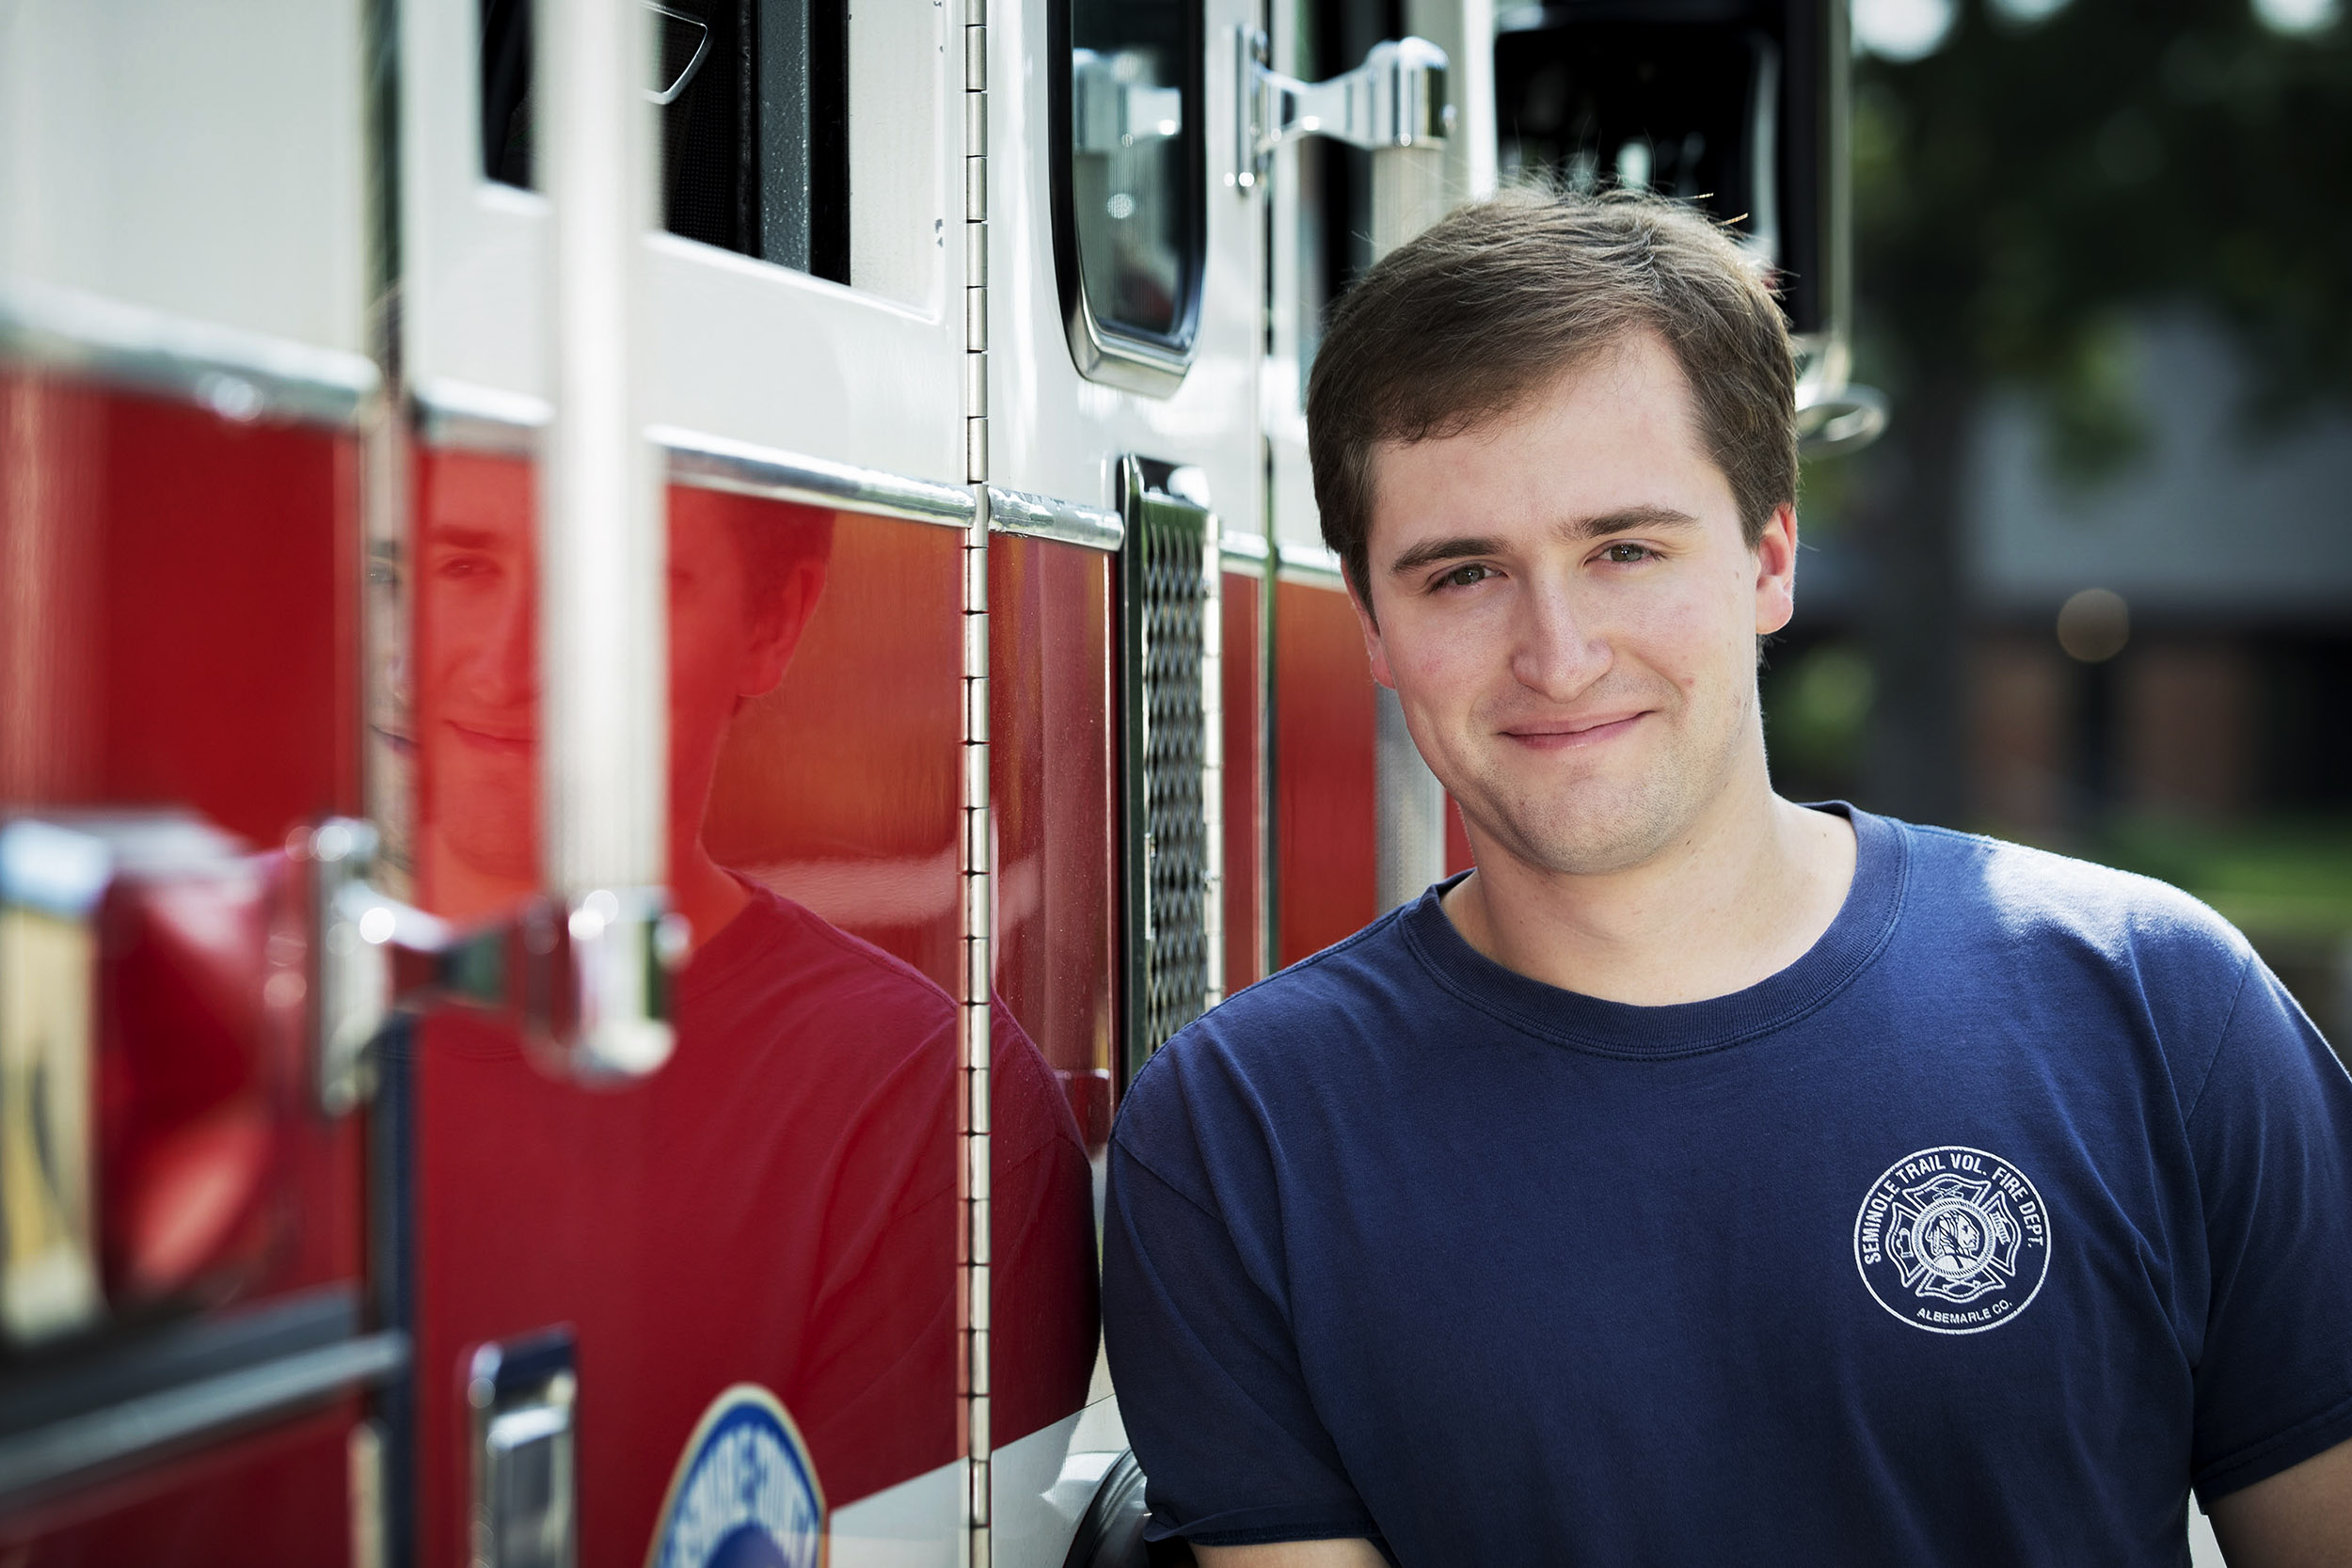 Walker Smith leaning on a Seminole Trail Firetruck looking at the camera smiling